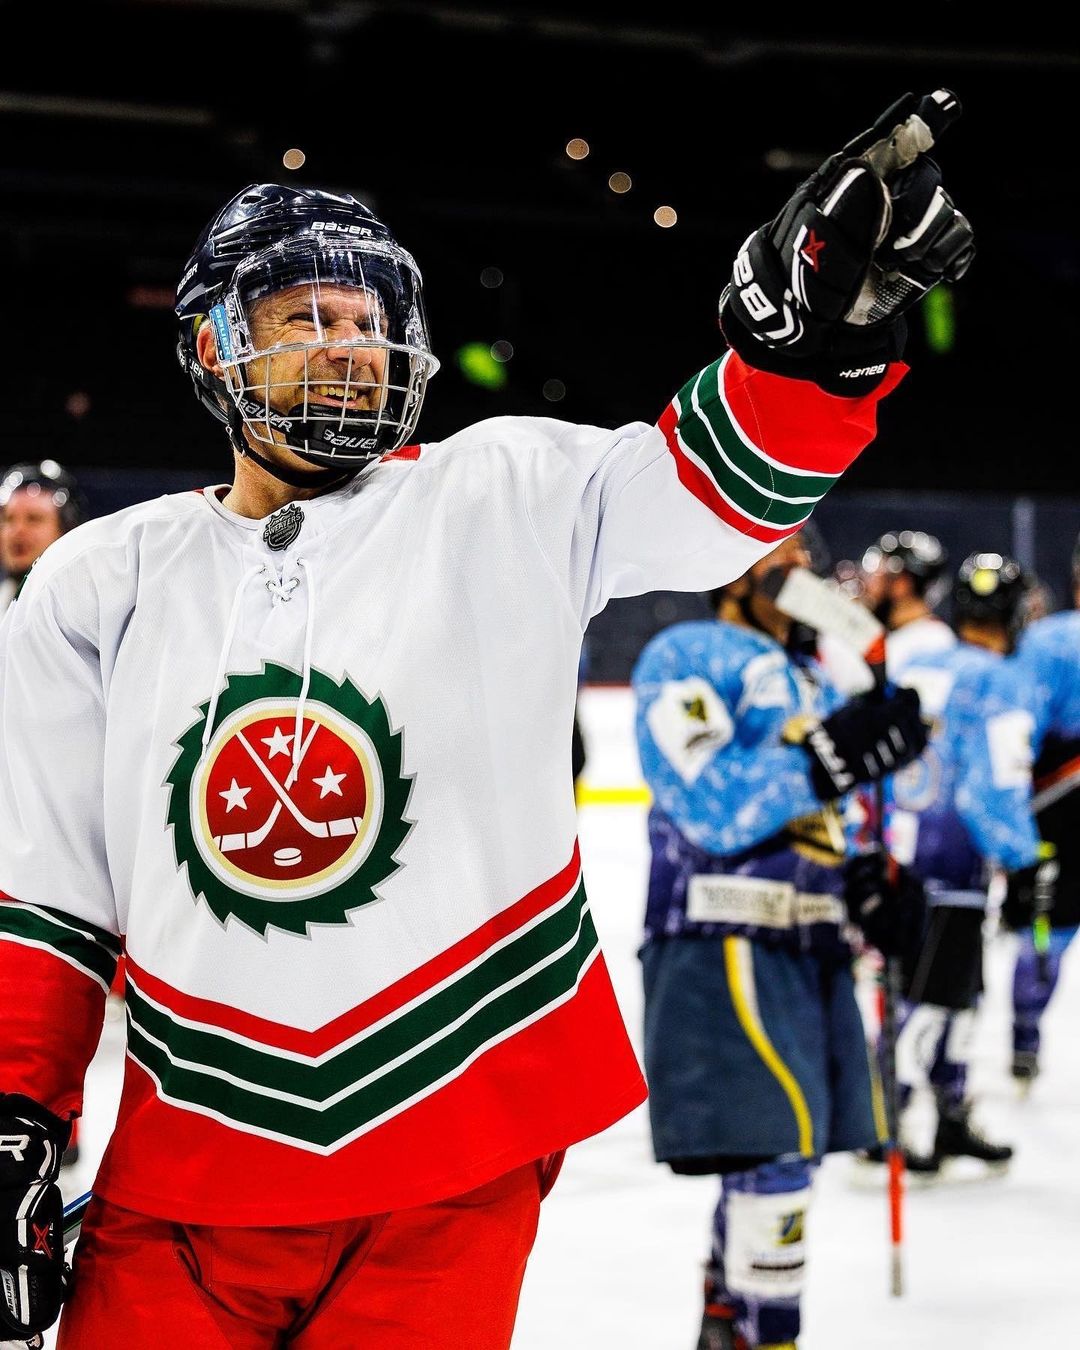 How to Hockey Jersey – Men's League Sweaters